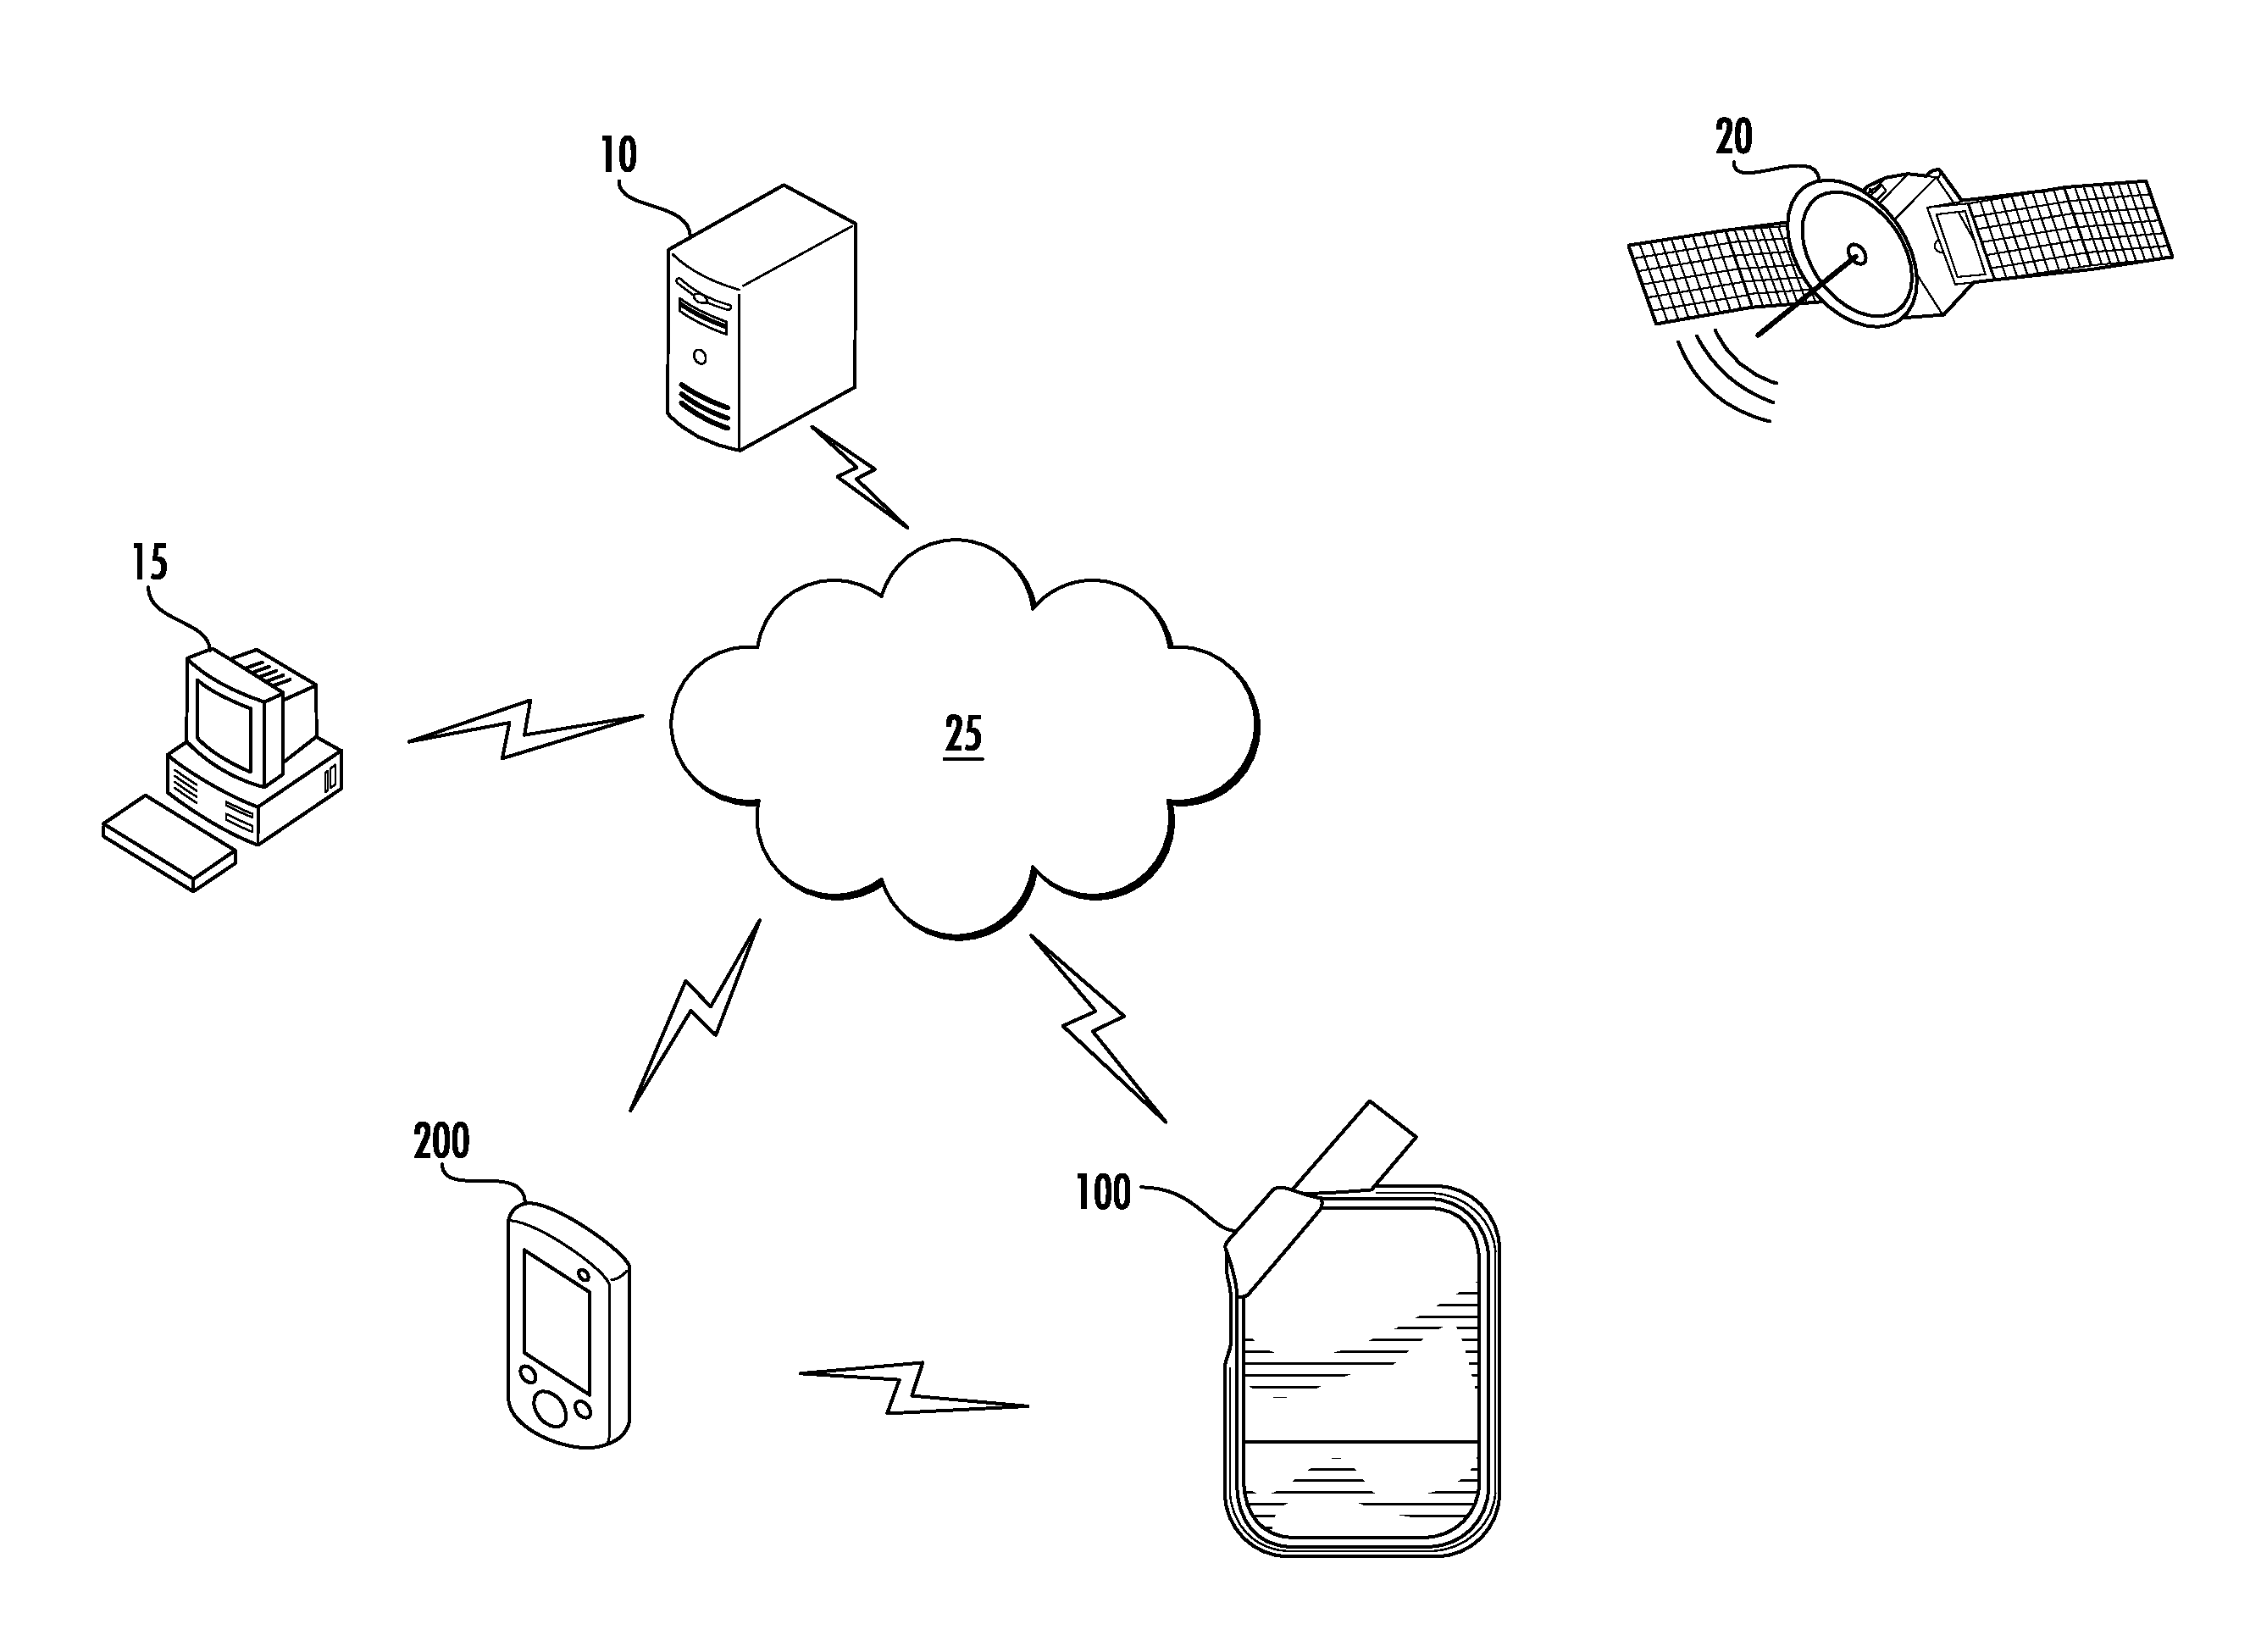 Mobile devices and applications, methods, and computer program products for use in communication with an alcohol detection device